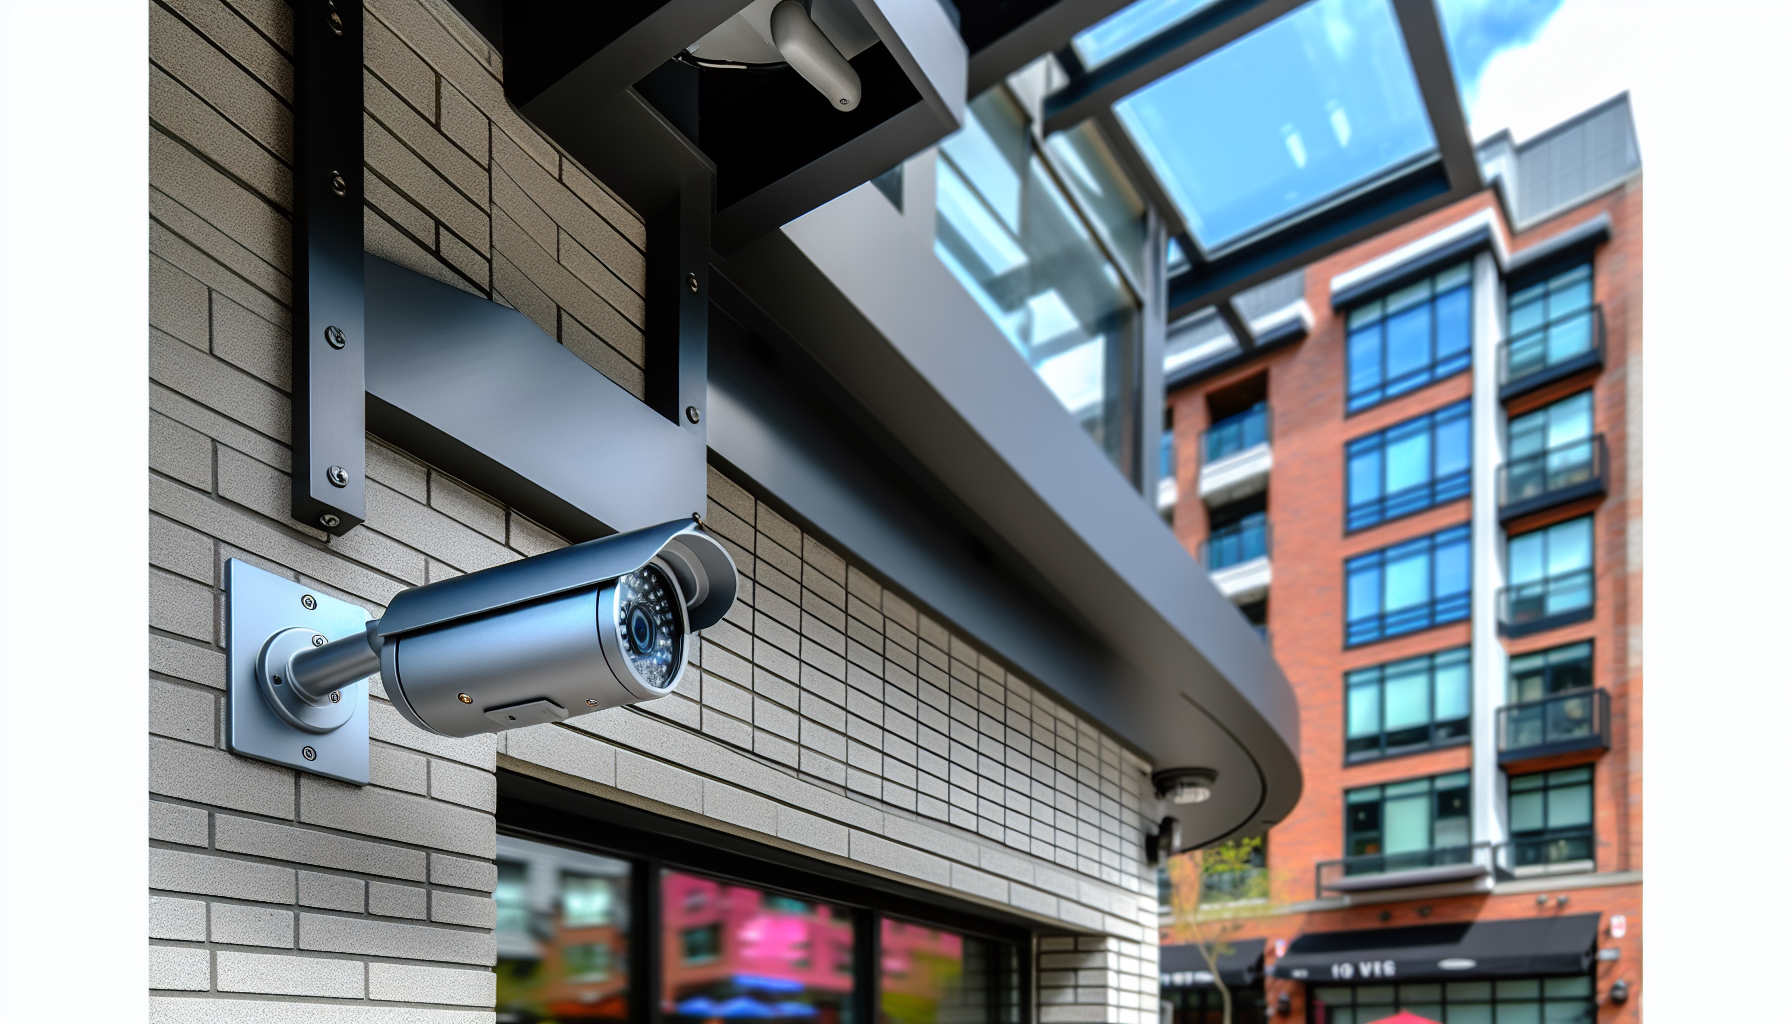 A security camera monitoring a business property